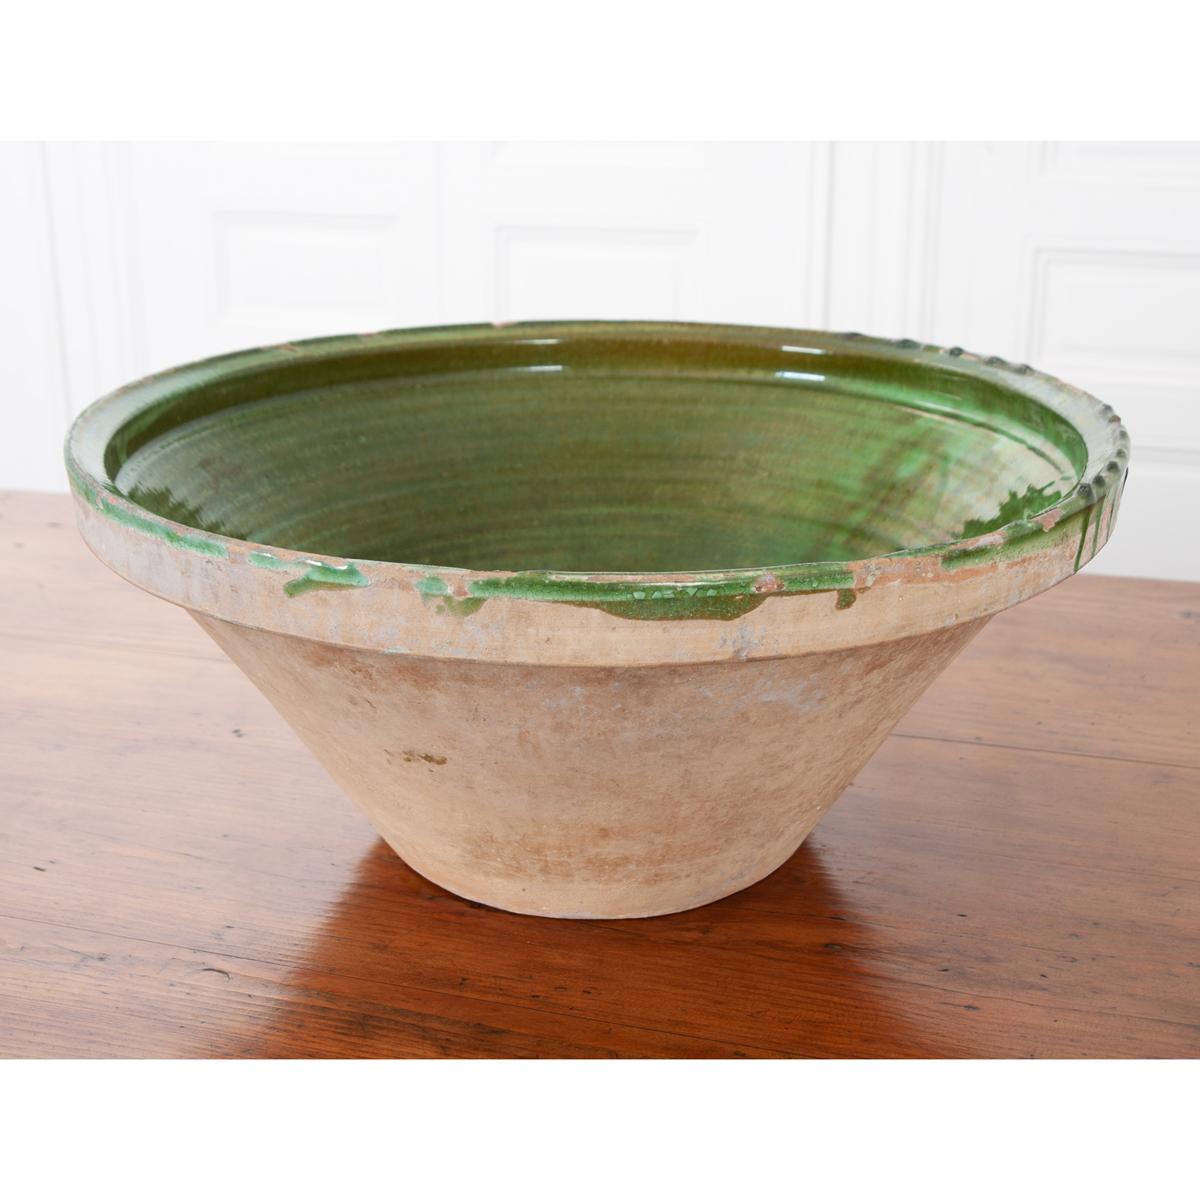 This terracotta mixing bowl has a green glazed interior, made for mixing in the kitchen. It’s a wonderful example of antique kitchenware and can be used in many applications today.